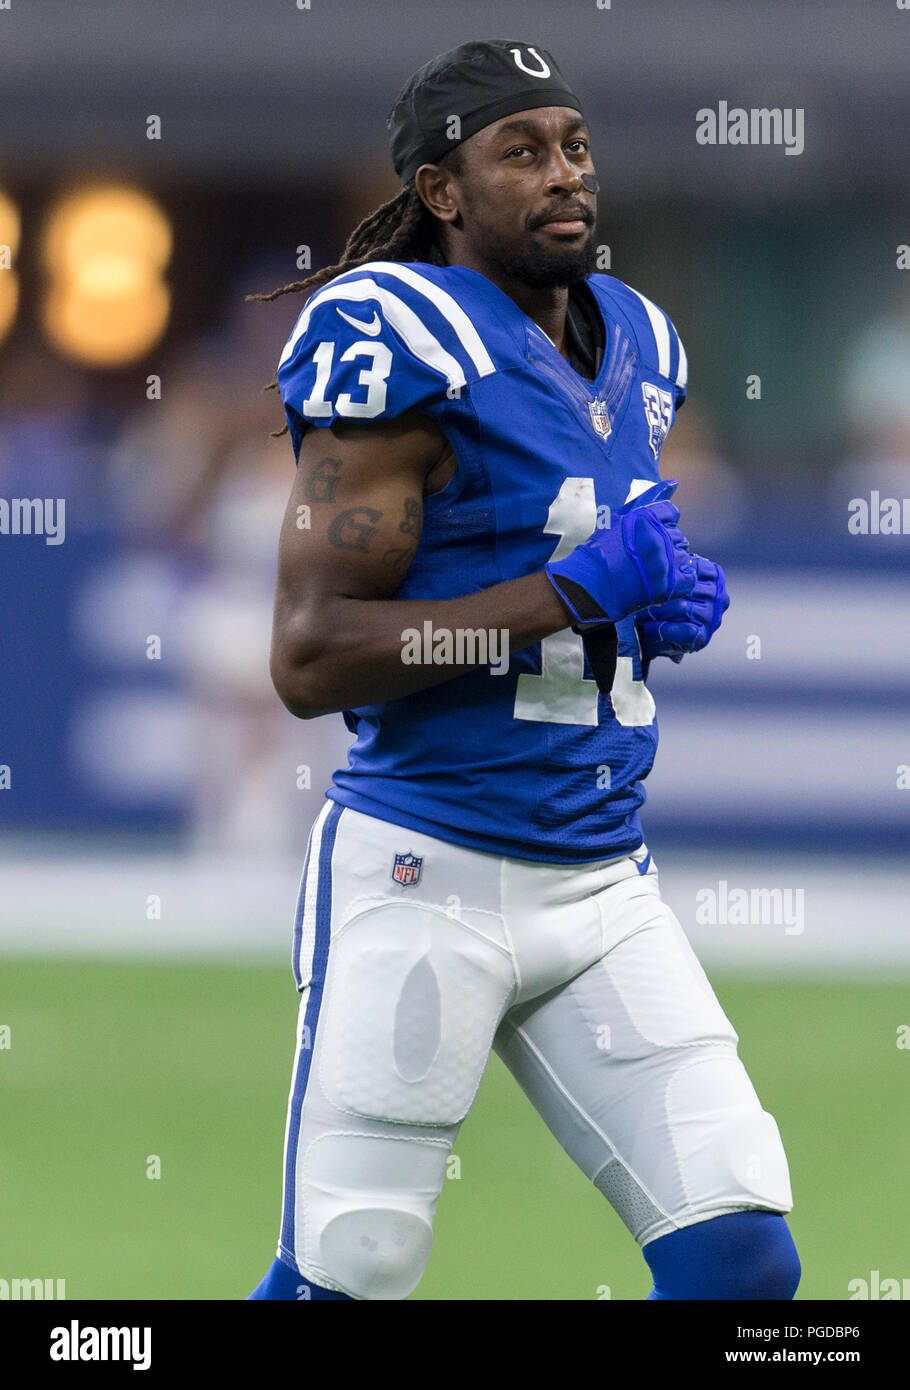 August 25, 2018: Indianapolis Colts wide receiver T.Y. Hilton (13) during  NFL football preseason game action between the San Francisco 49ers and the  Indianapolis Colts at Lucas Oil Stadium in Indianapolis, Indiana.